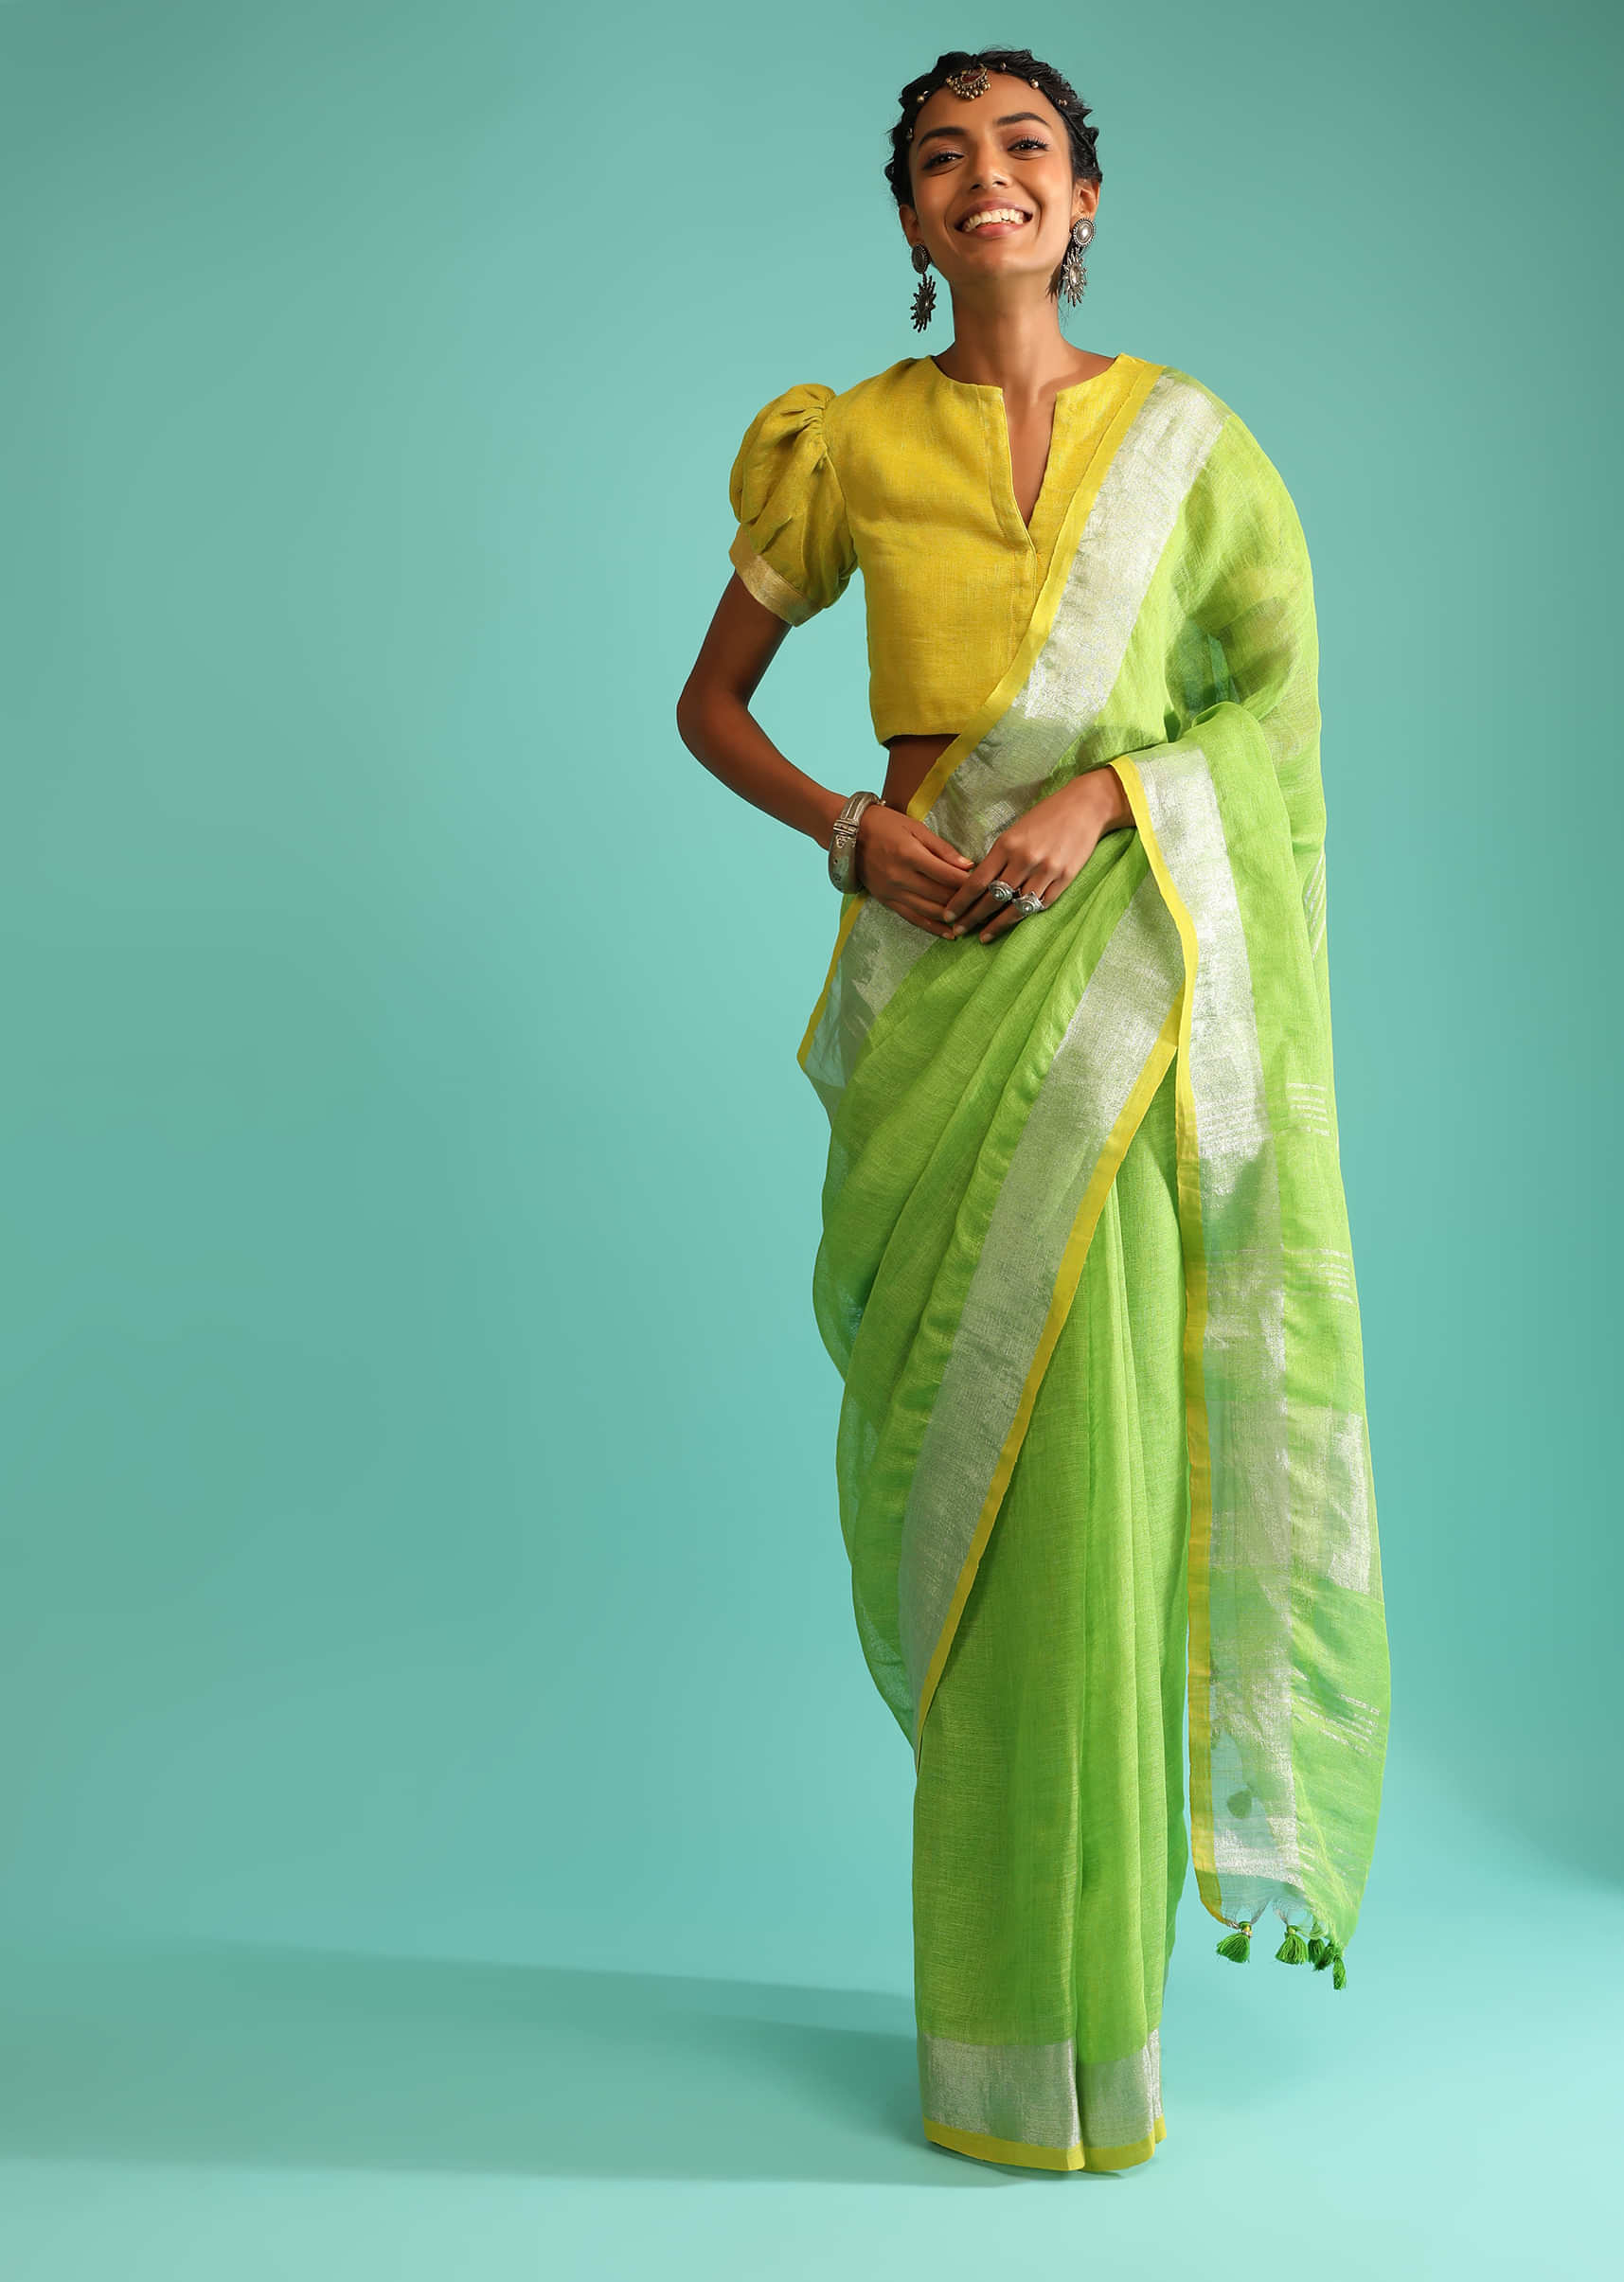 Parrot Green Saree In Linen With Silver Brocade Border And Striped Pallu Along With Yellow Unstitched Blouse  